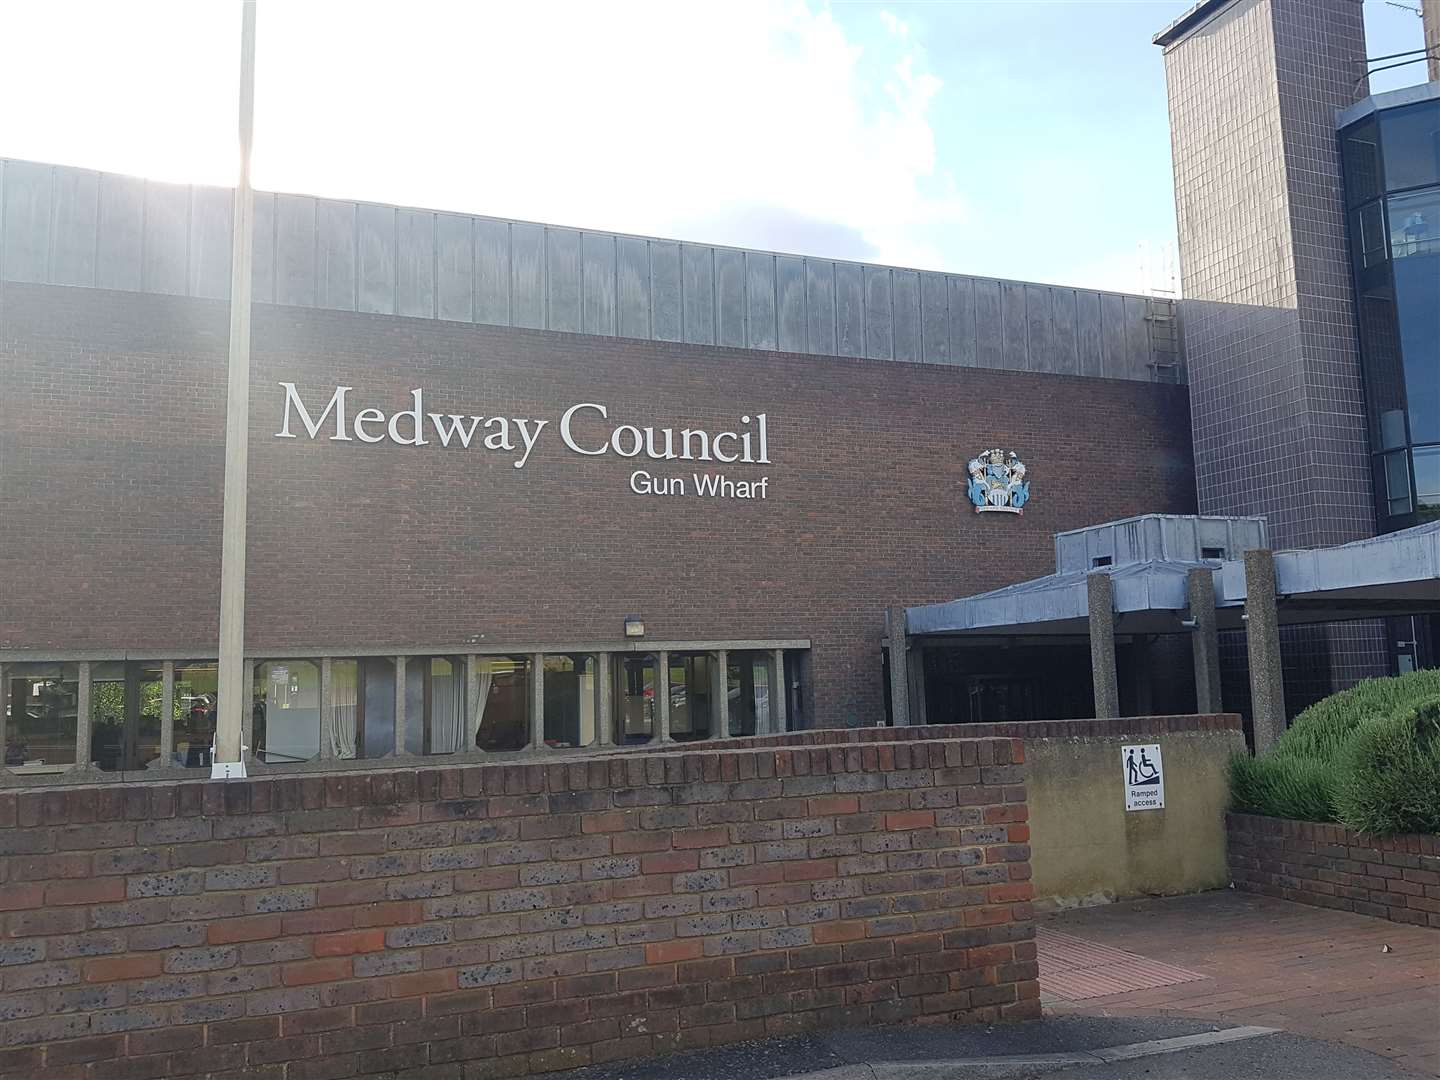 Gun Wharf is the home of Medway Council (6592566)